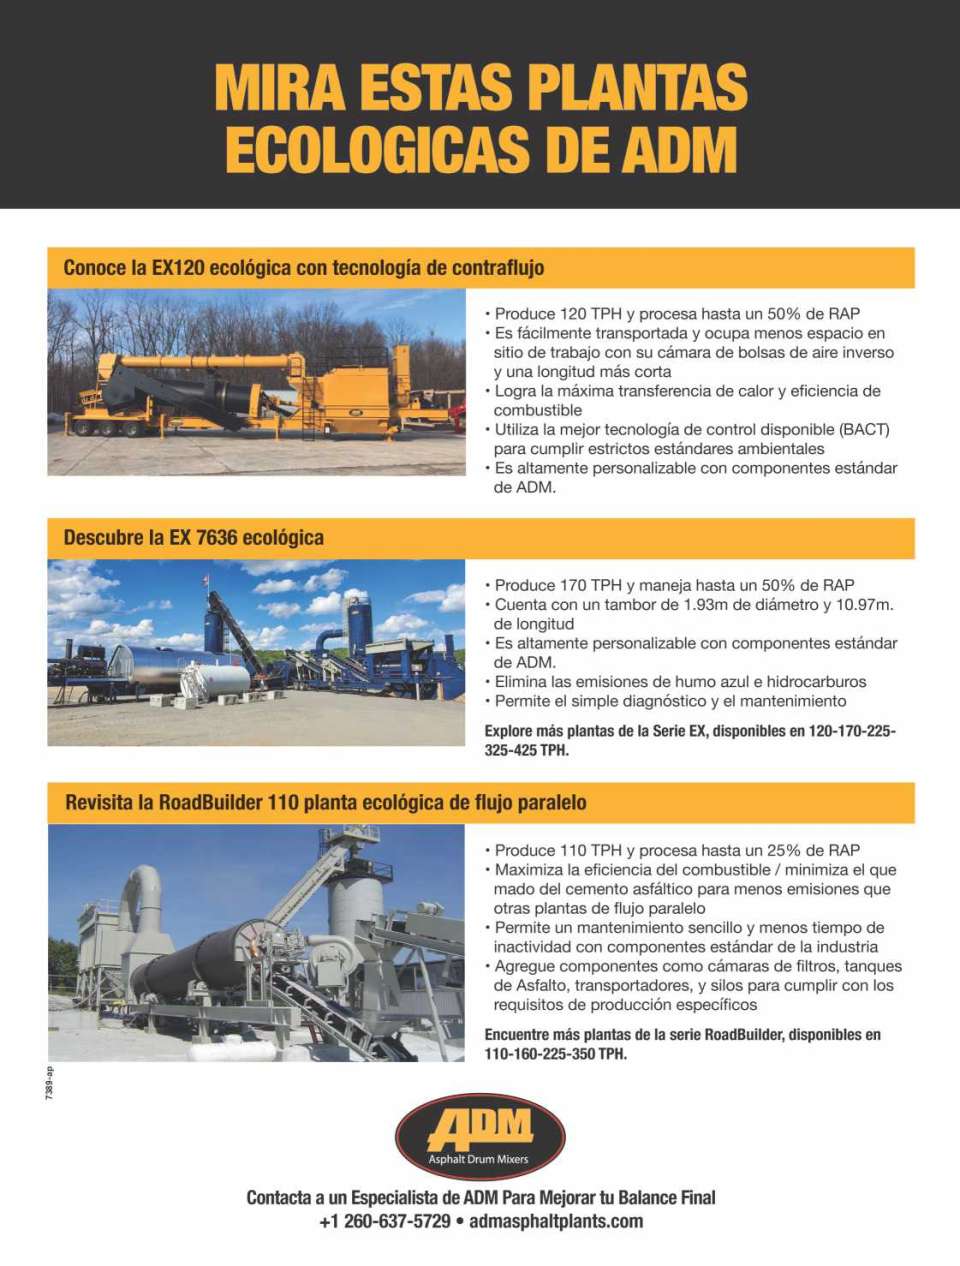 Imagine What You Can Do With ADM. Consult with one of our specialists today to help configure just the right asphalt plant to meet your specific production needs.